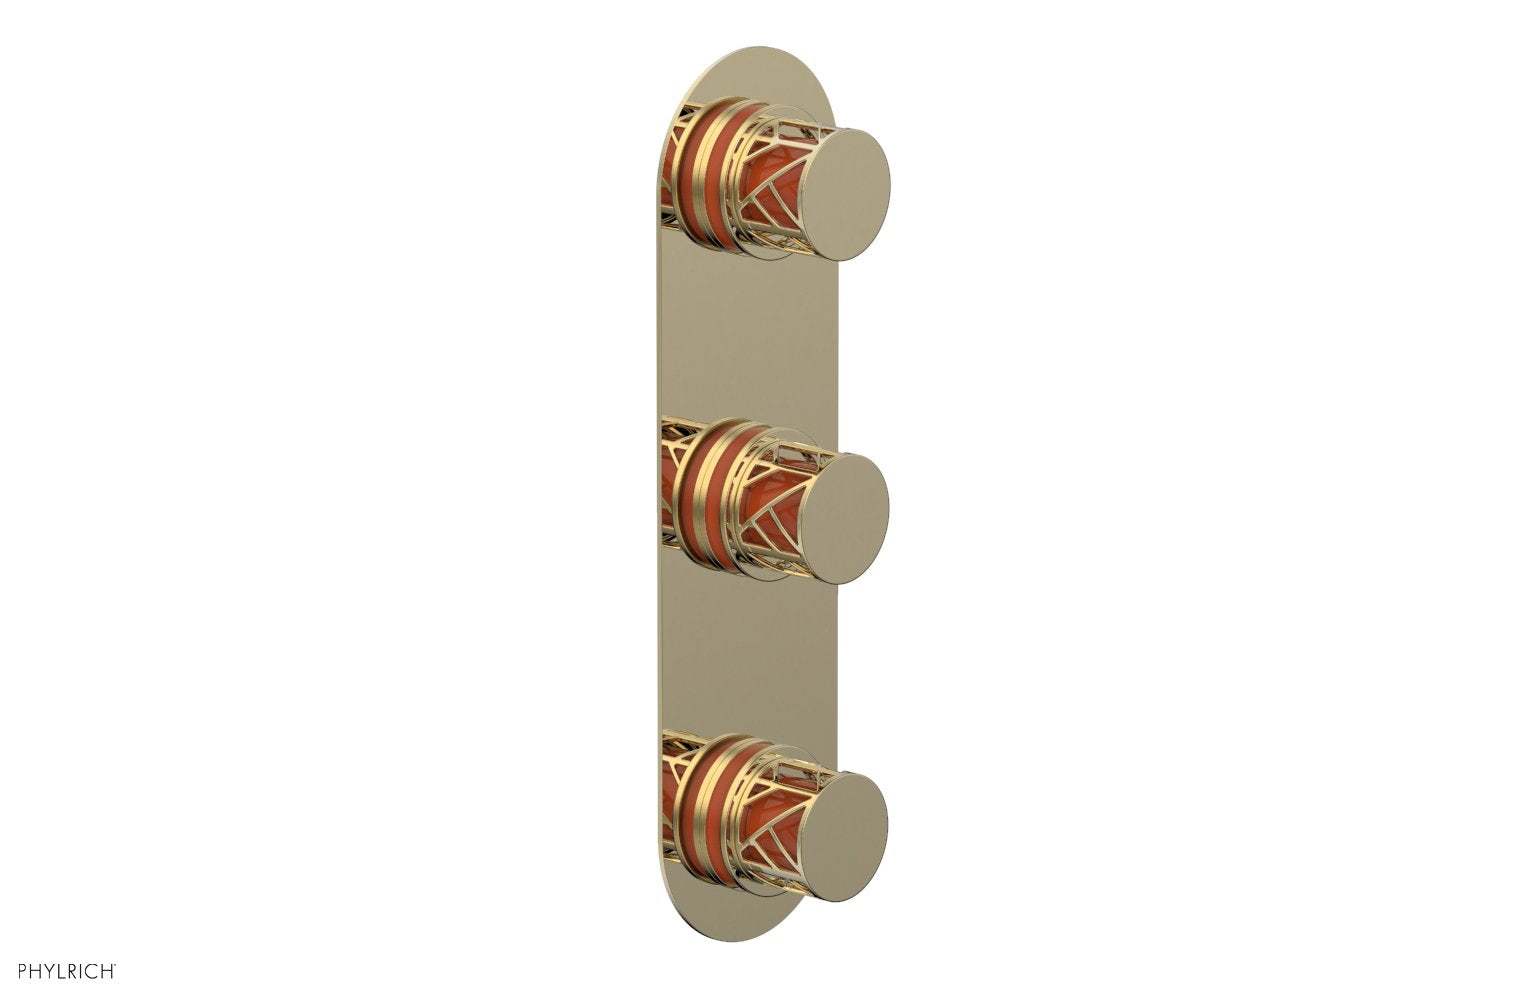 Phylrich JOLIE Thermostatic Valve with Two Volume Control with "Orange" Accents